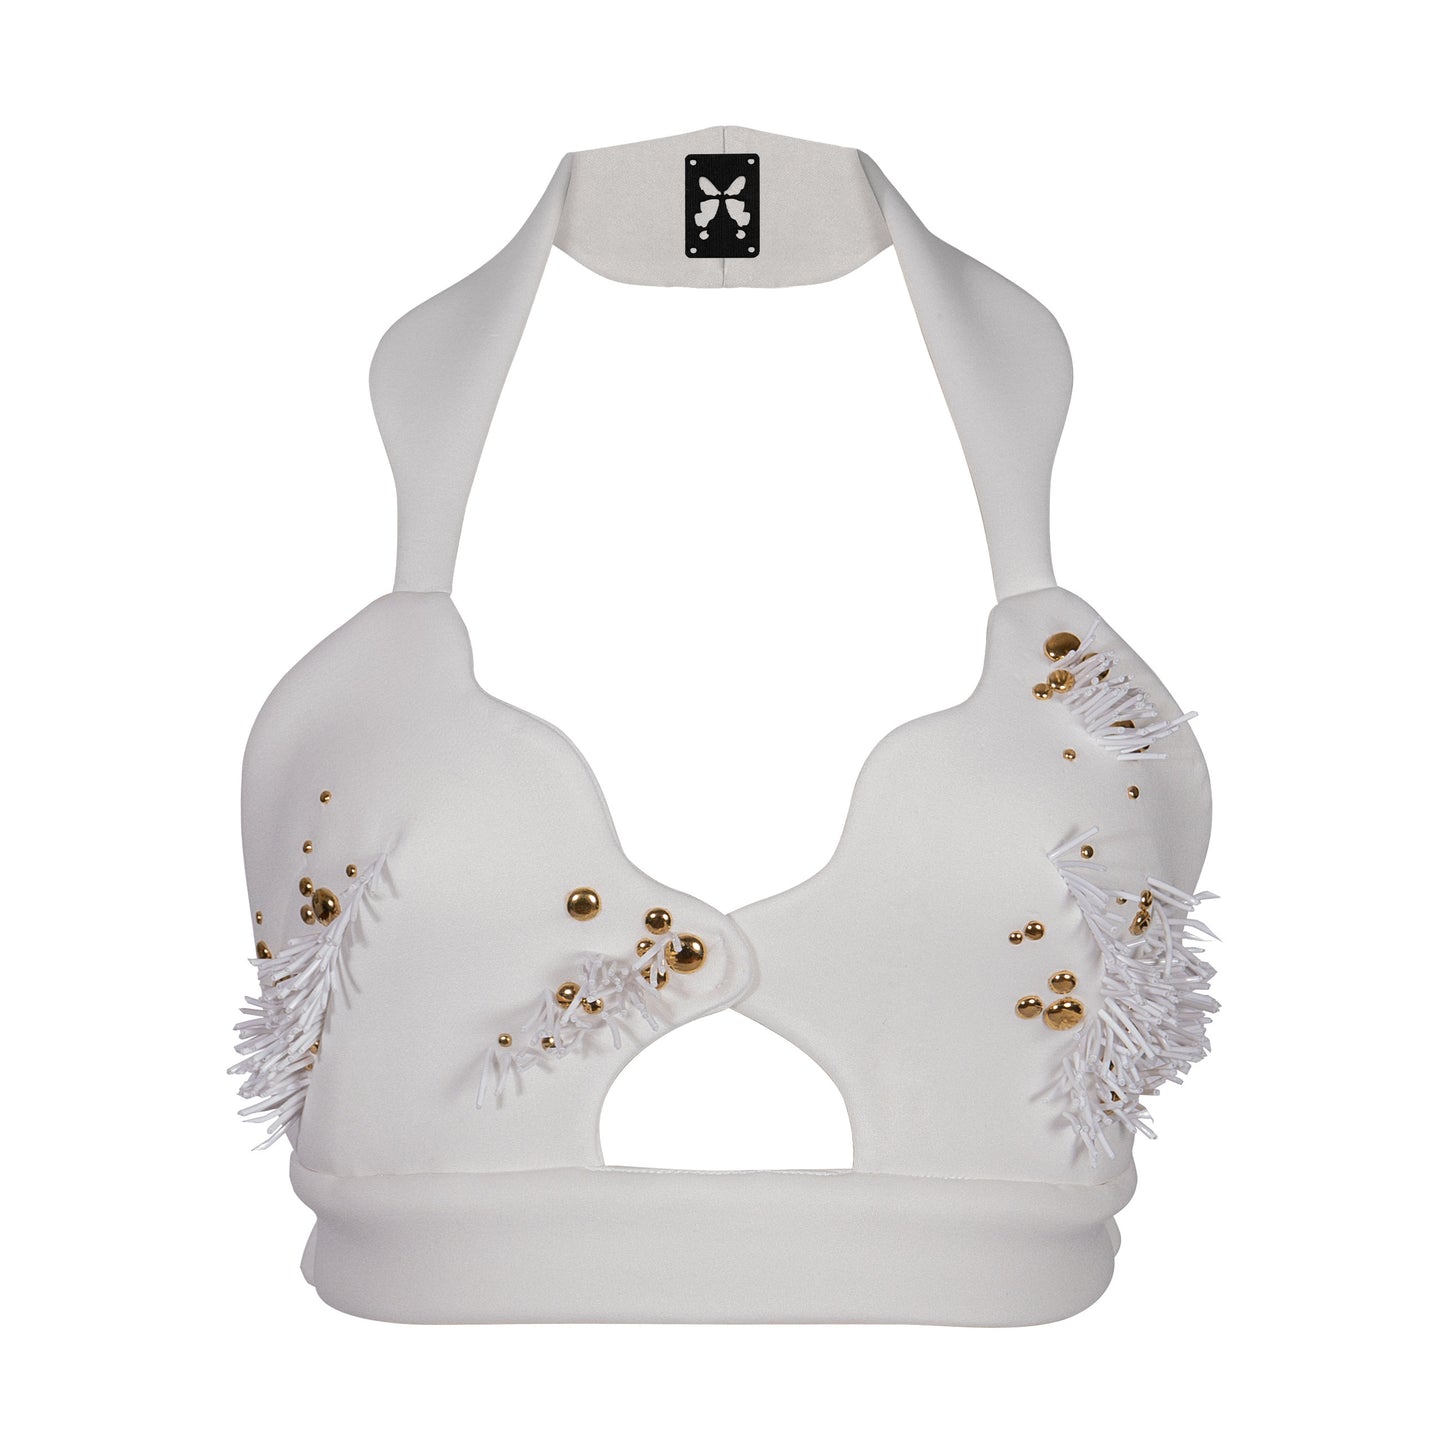 ARTA, white brassiere with abstract embroidery